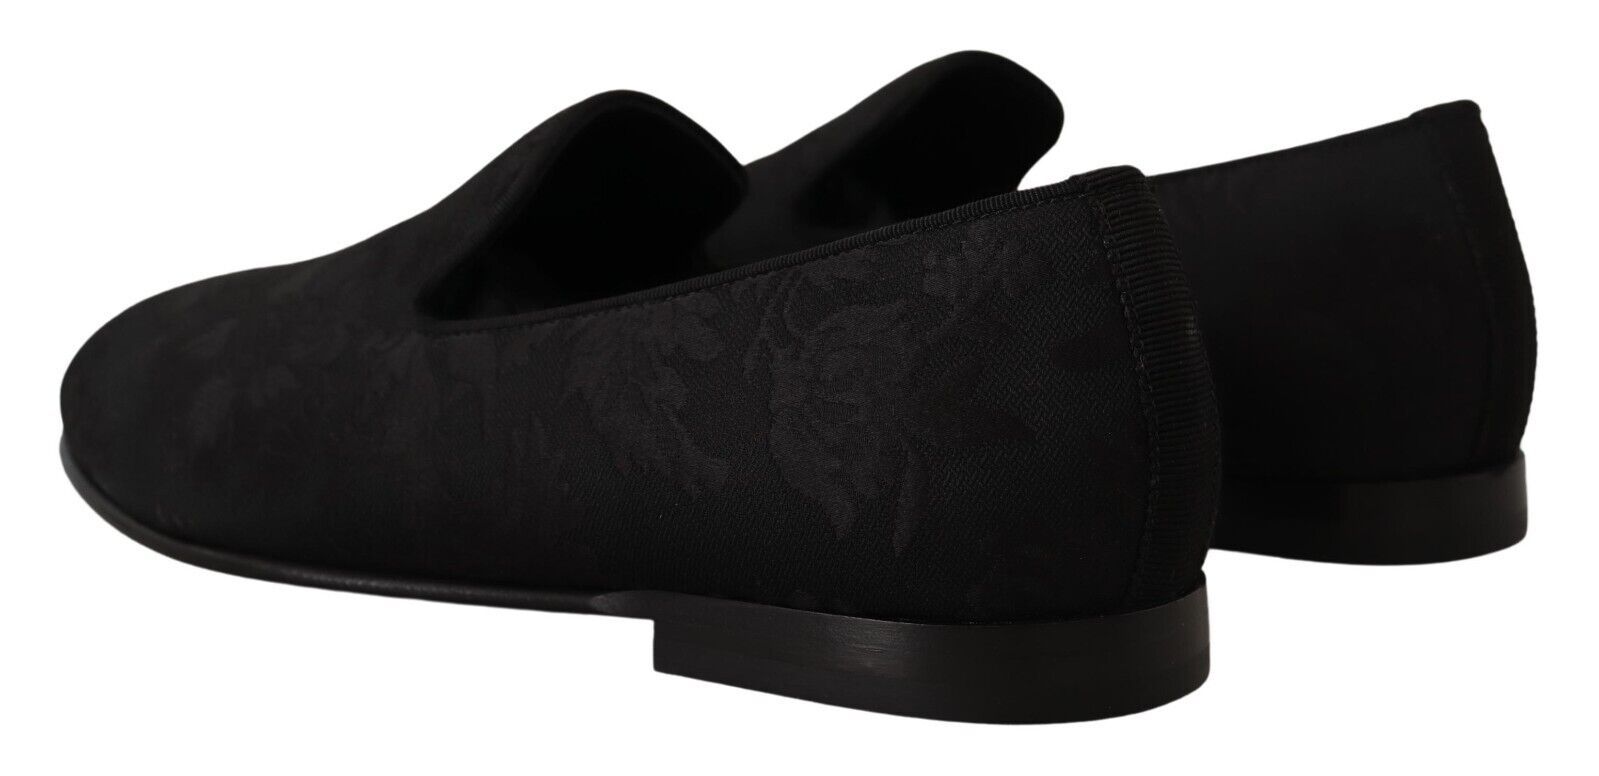 Dolce & Gabbana Black Jacquard Slippers Flats Loafers Shoes - GENUINE AUTHENTIC BRAND LLC  